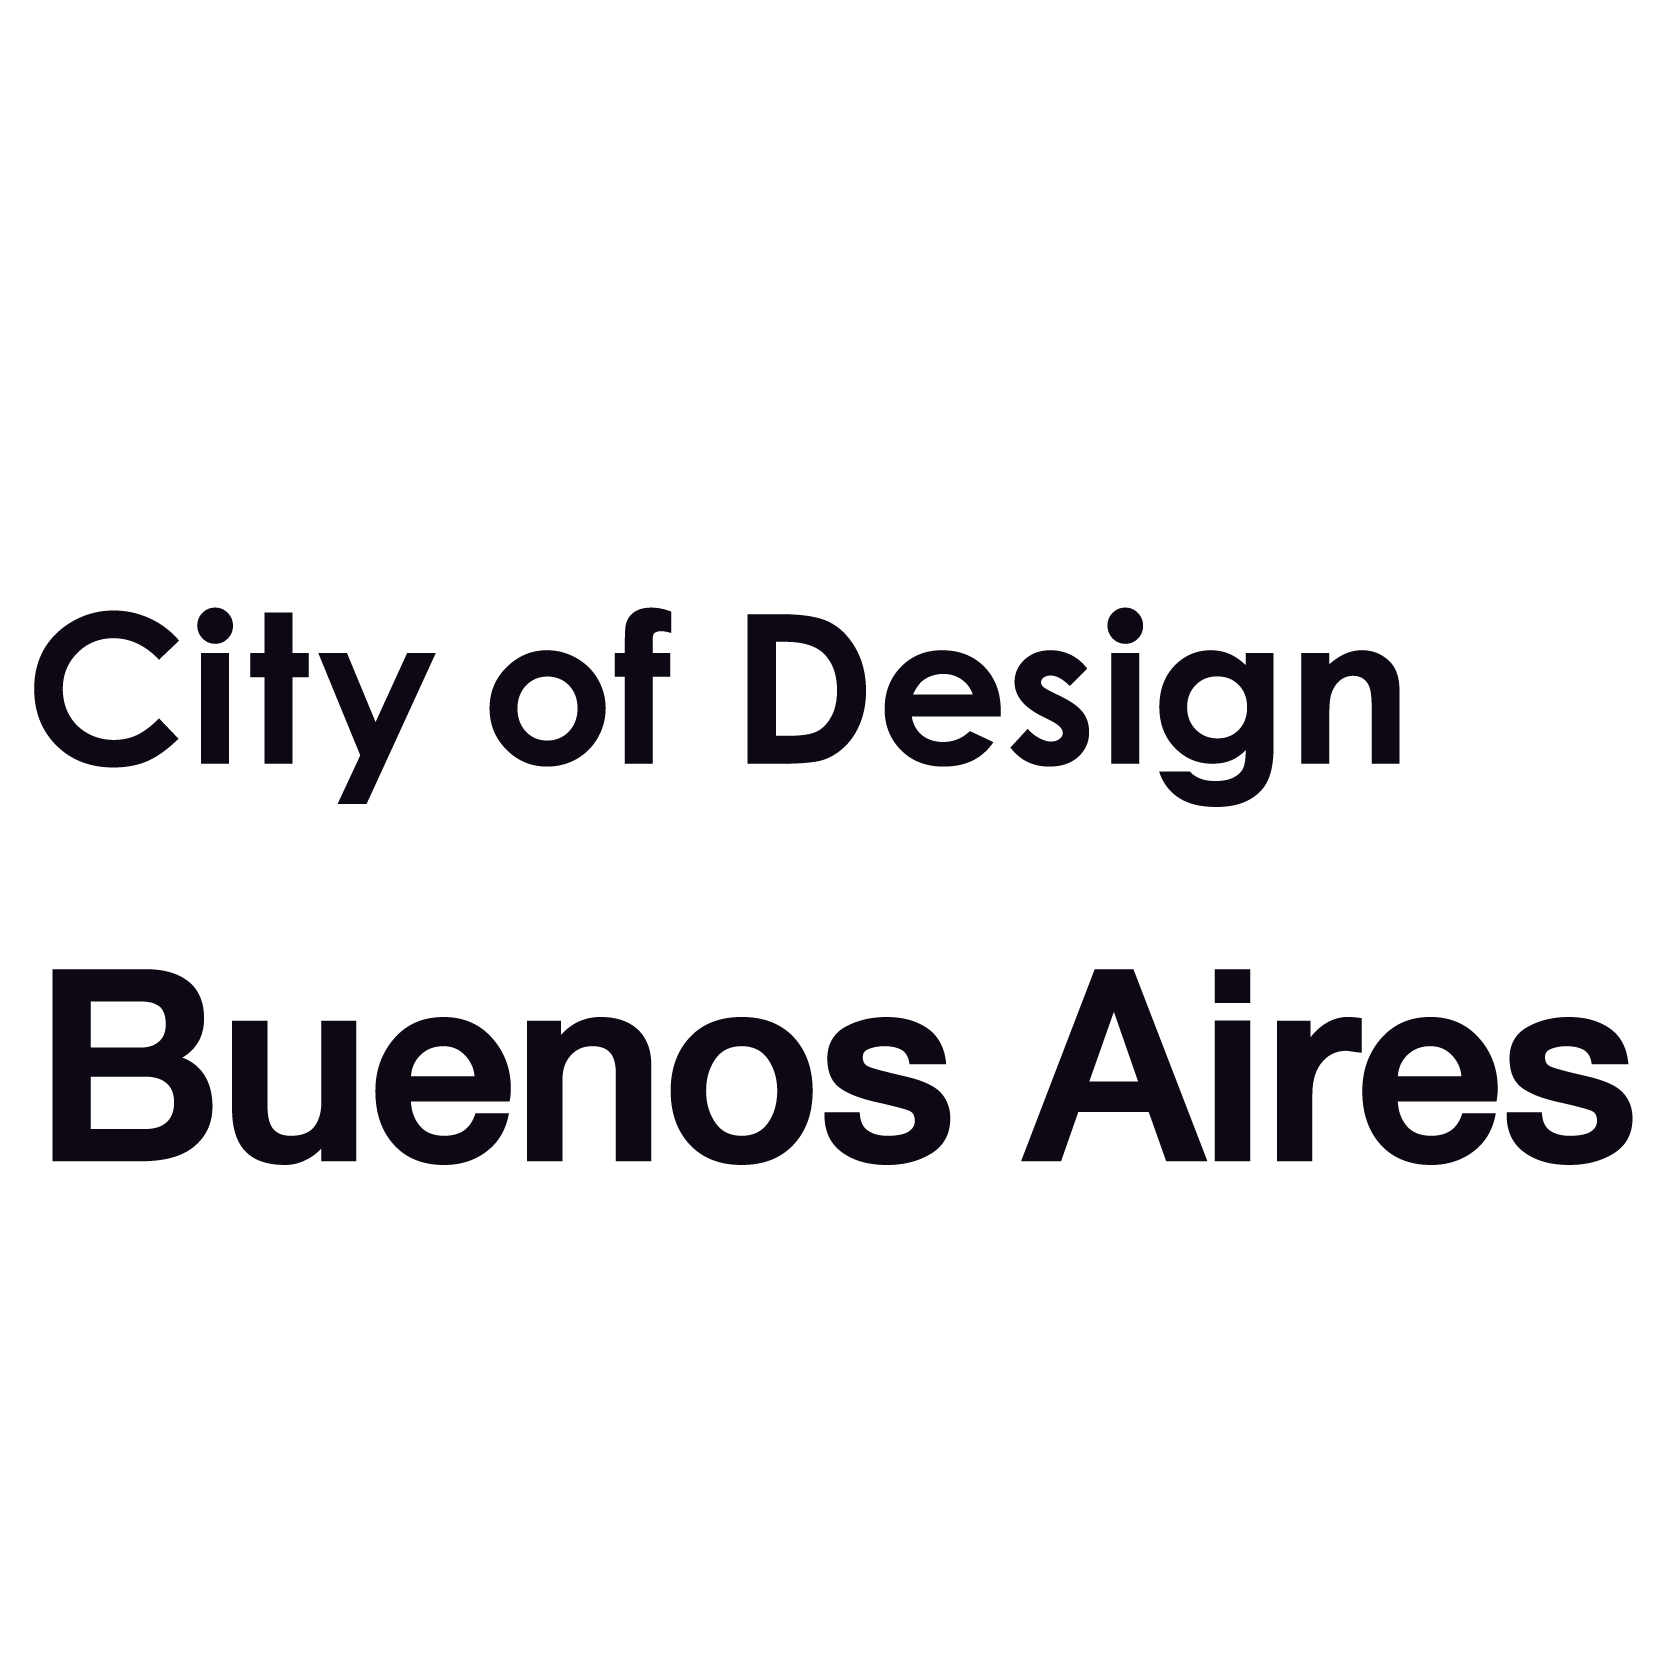 Buenos Aires, City of Design